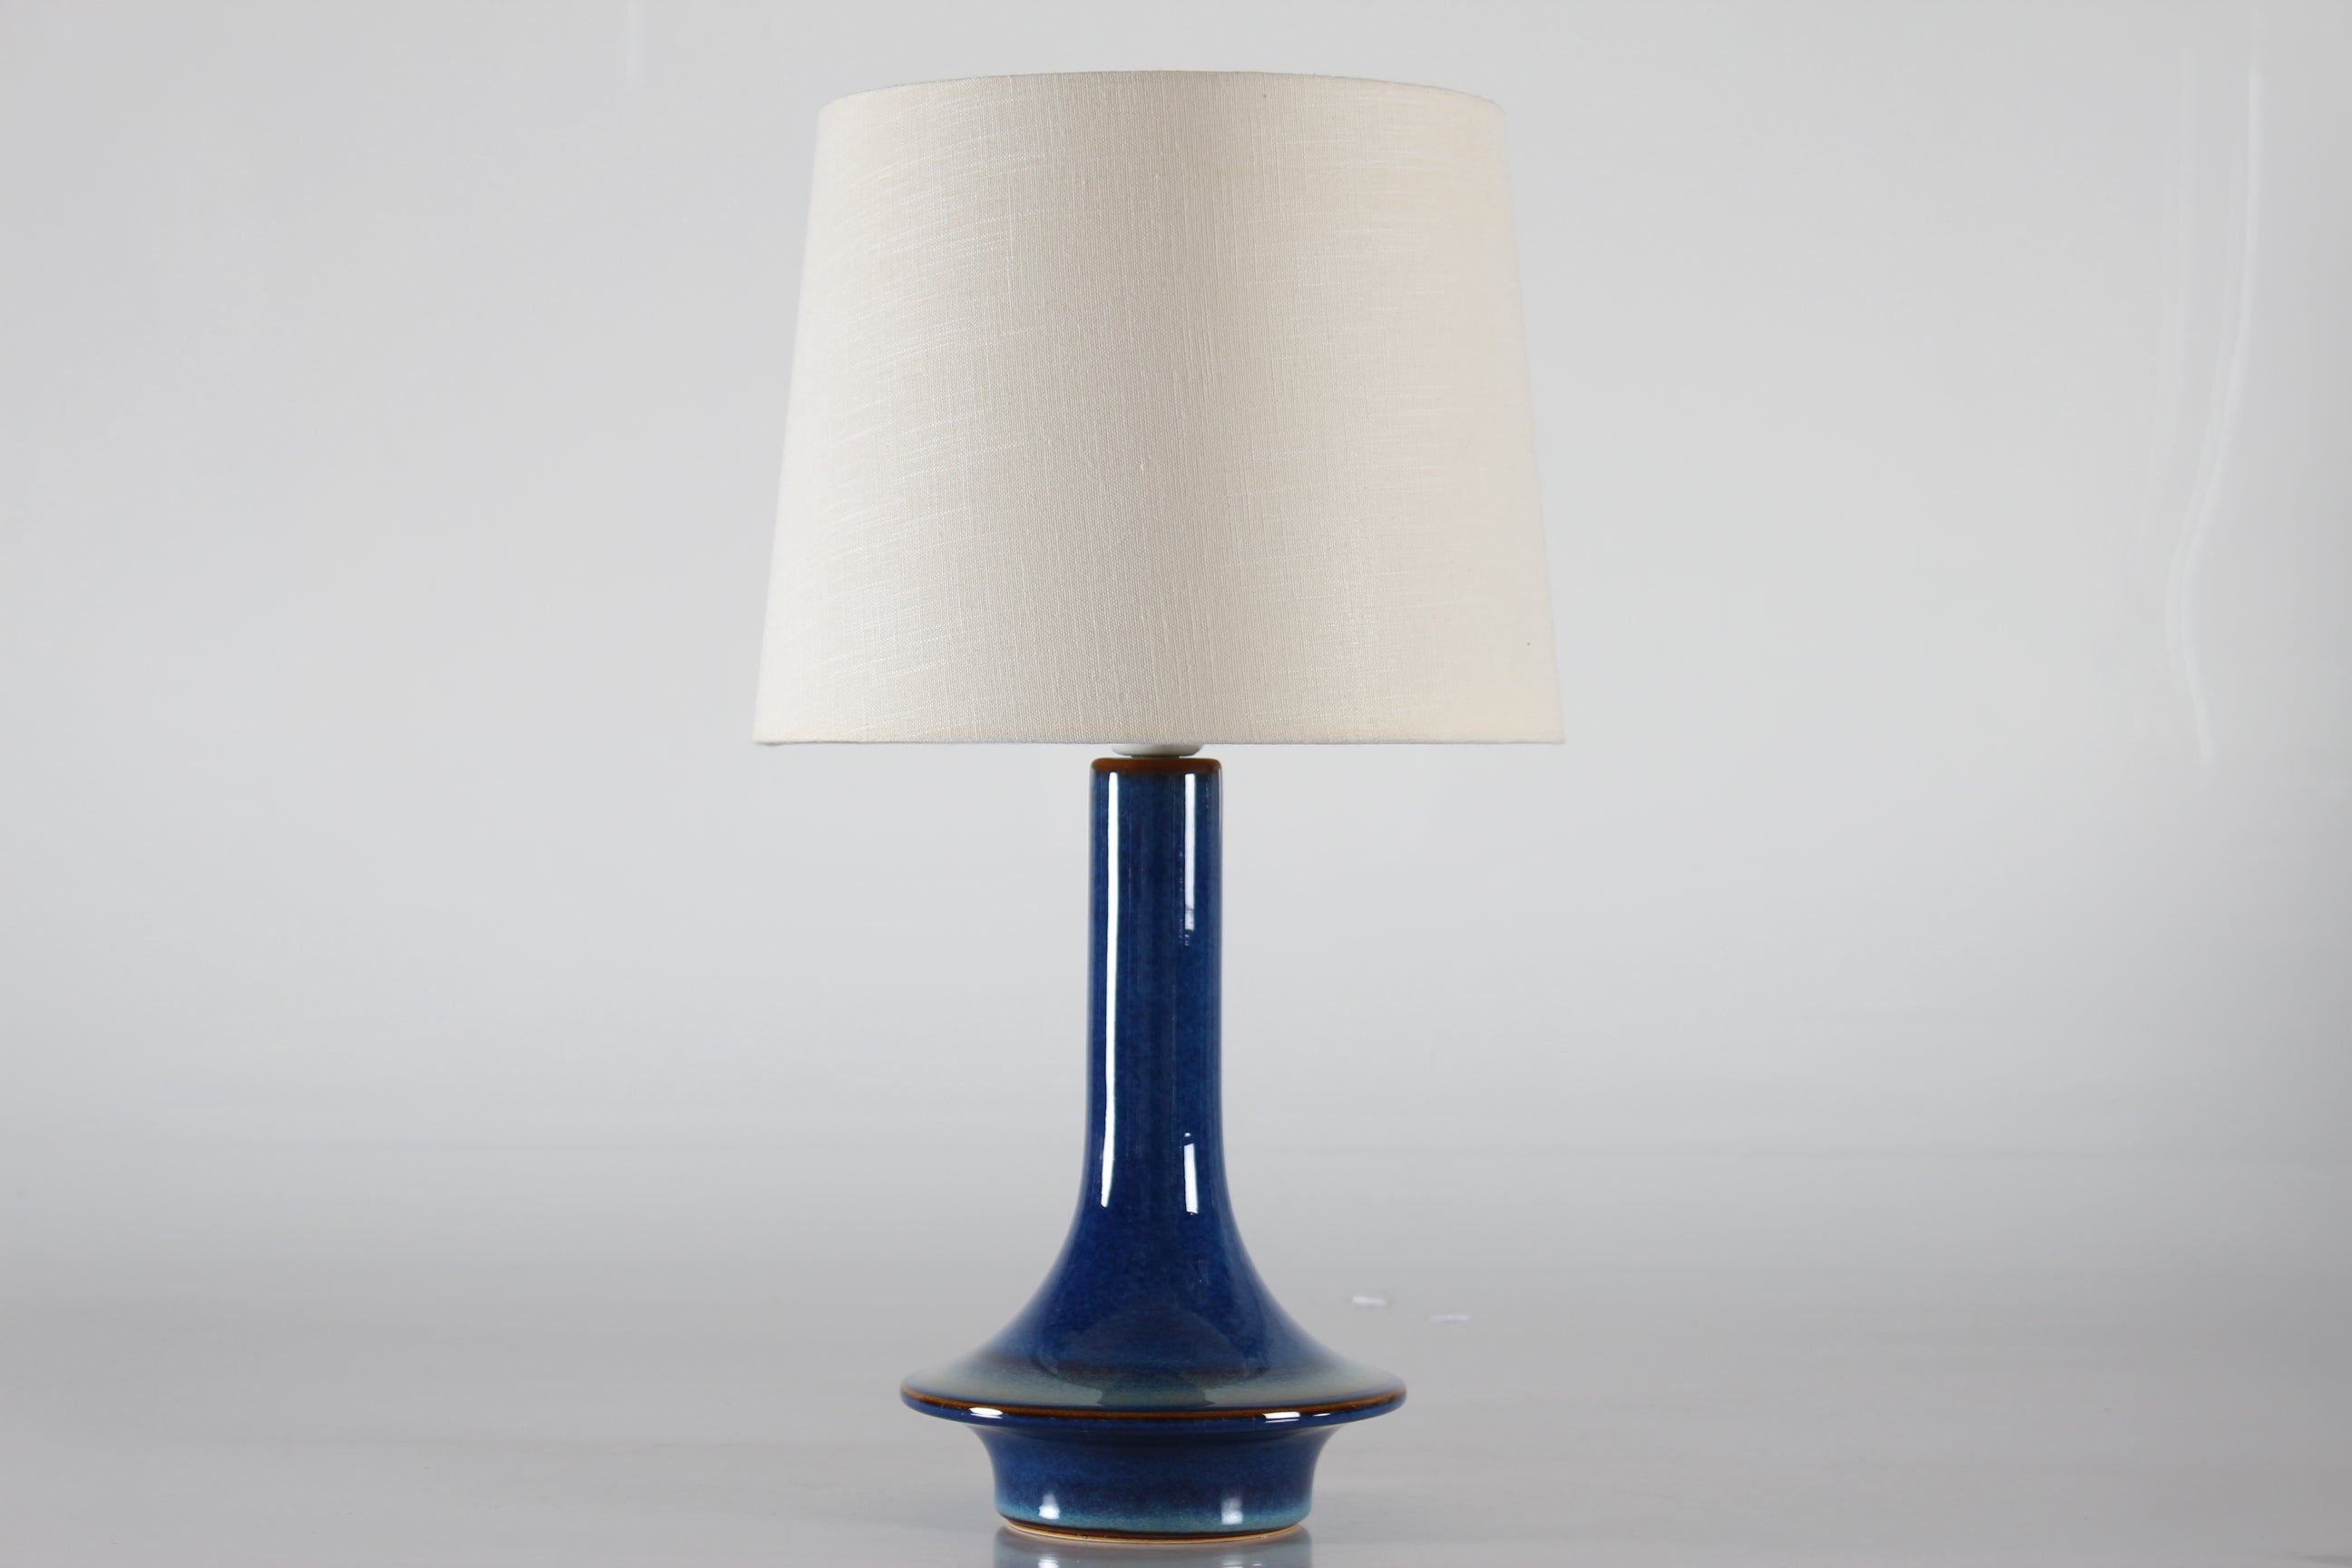 Danish Modern Sculptural ufo sharped table lamp made by Søholm Stentøj in the 1960s.
It's decorated with glossy glaze in a beautiful color play in dark blue and light green.

The new lamp shade is designed and made in Denmark. It's made of woven